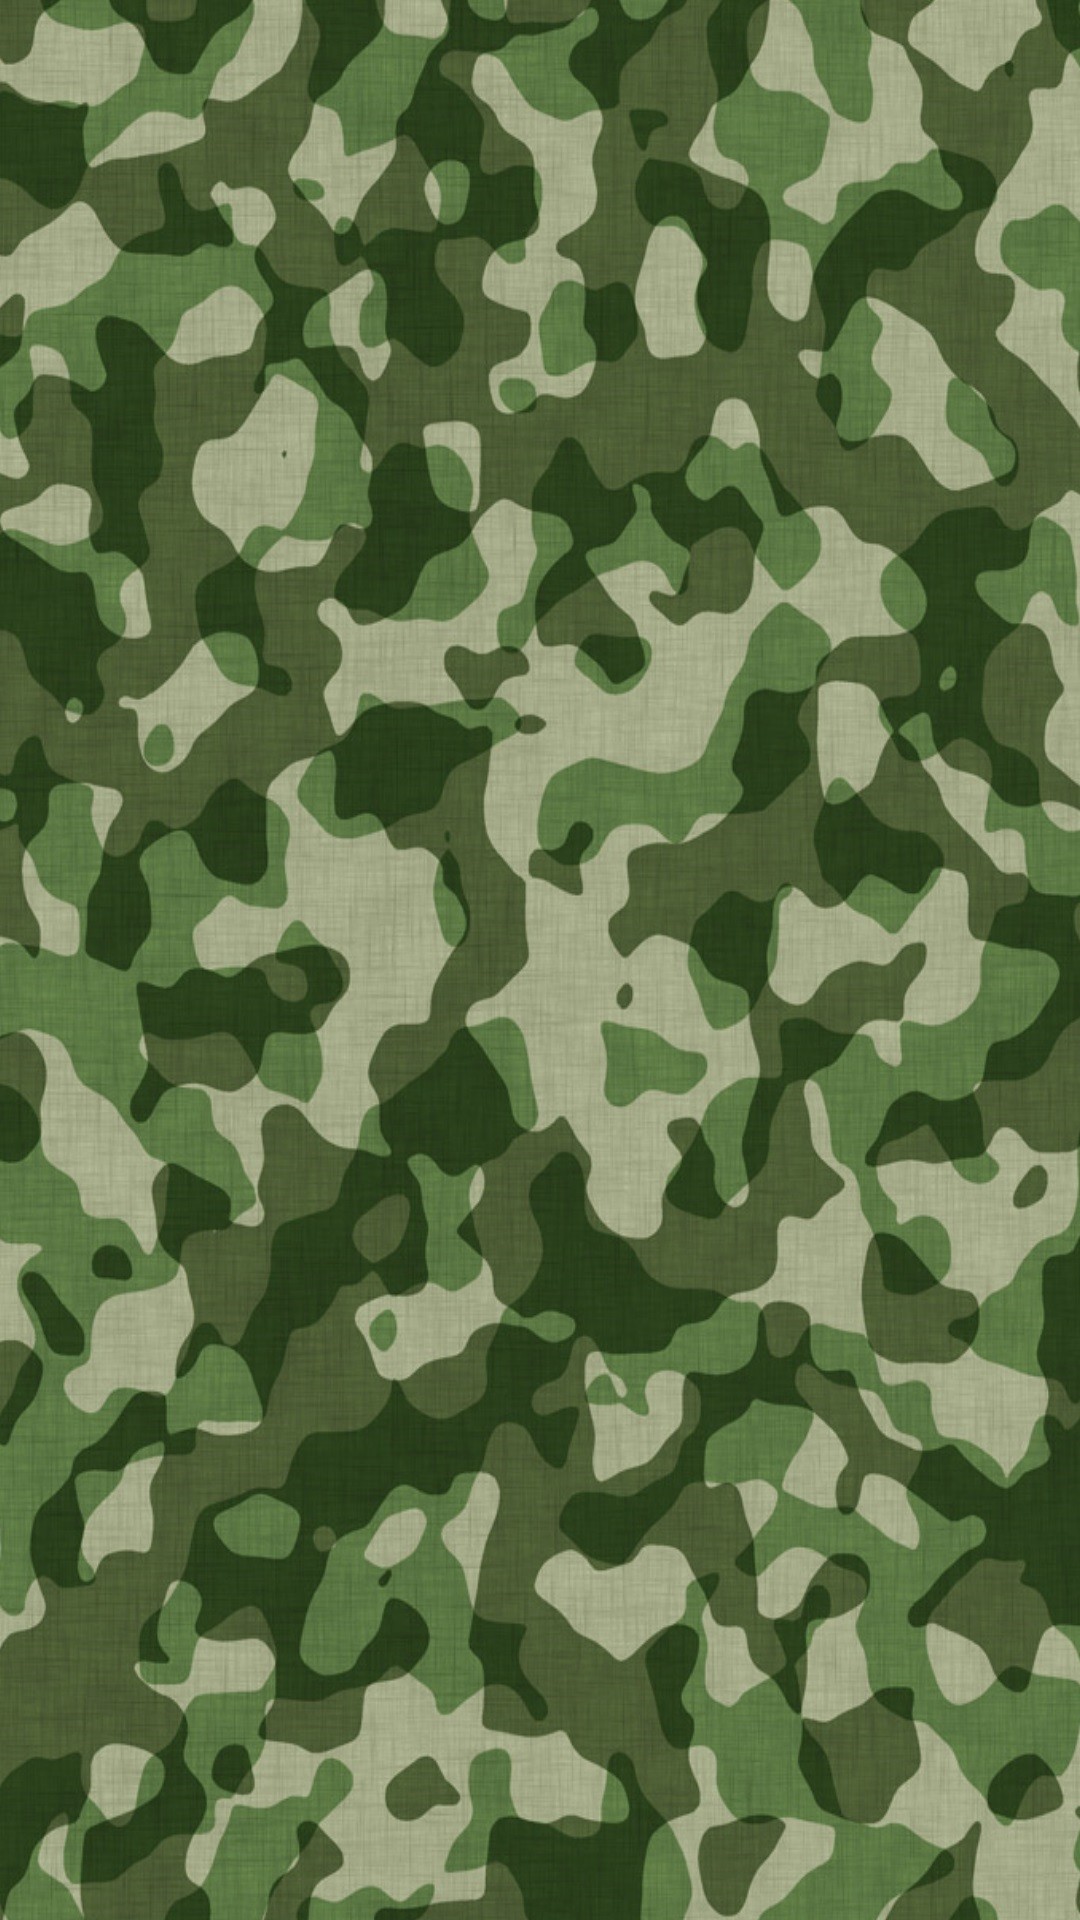 1080x1920 Camouflage wallpaper for iPhone or Android. Tags: camo, hunting, army,  backgrounds